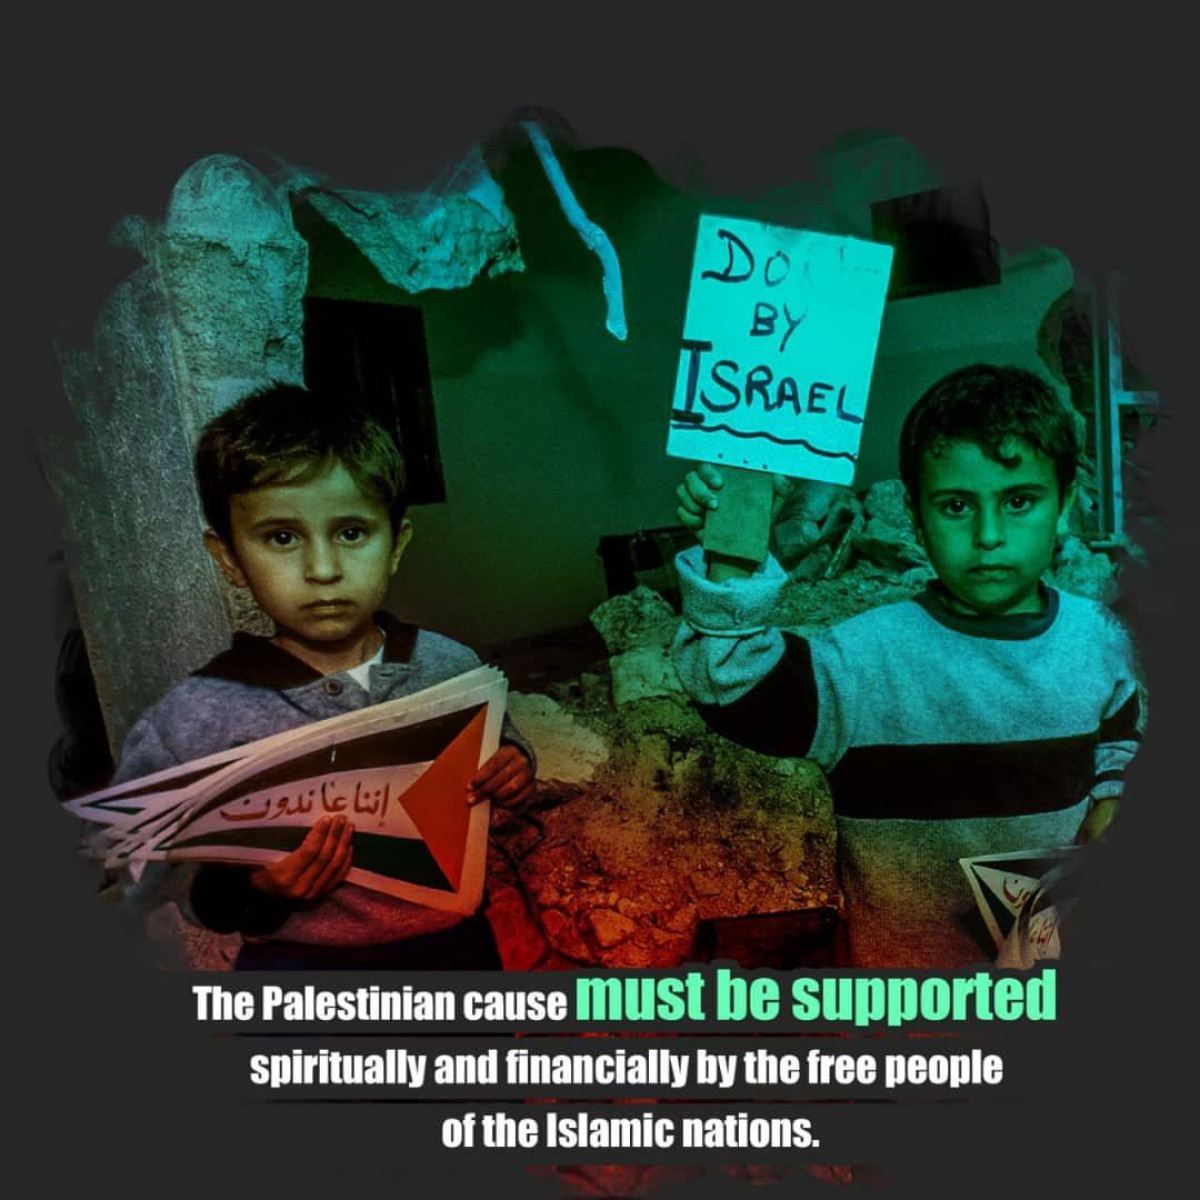 The Palestinian cause must be supported spiritually and financially by the free people of the Islamic nations.